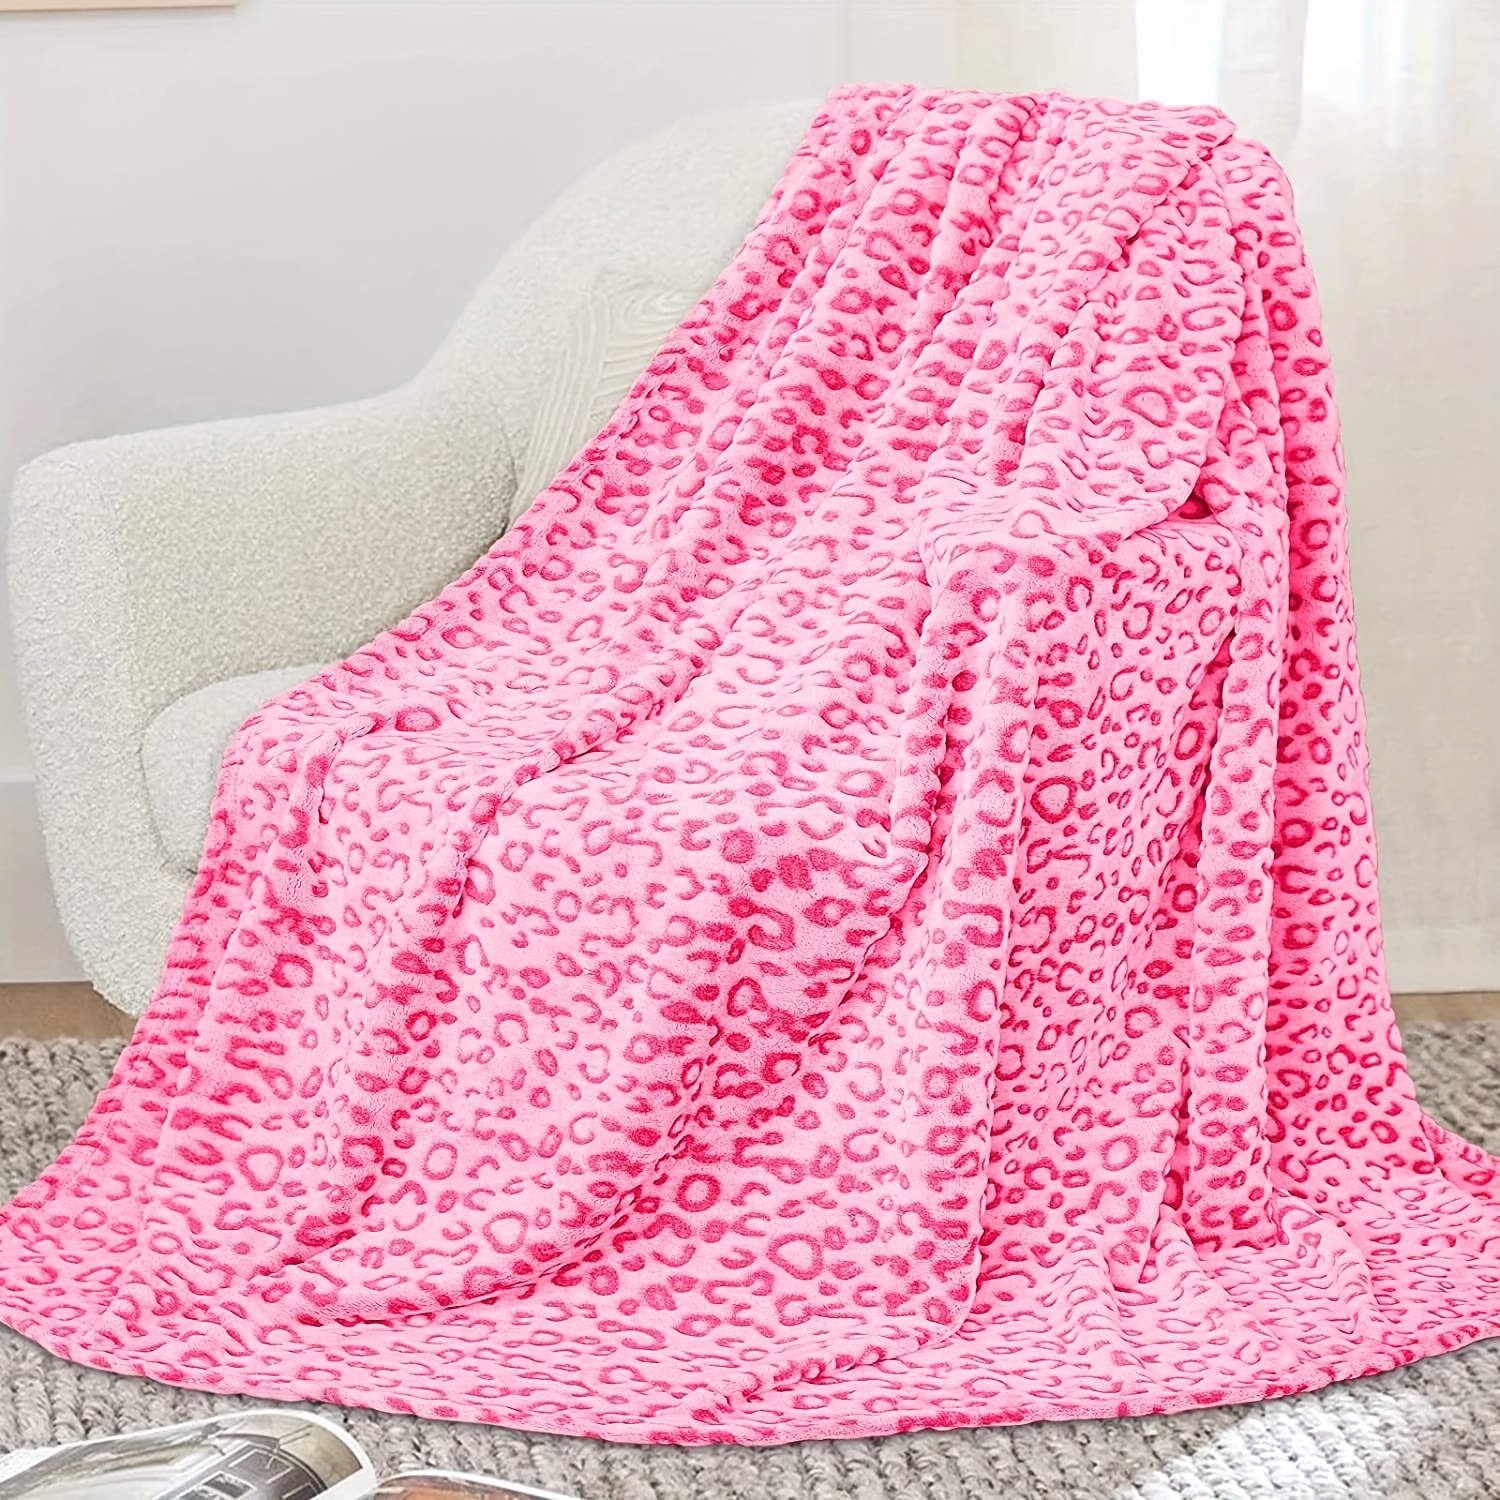 

1pc Soft And Fluffy Leopard Print Throw Blanket For Couch, Bed, Sofa, Office, Living Room, Camping - Jacquard Fleece And Flannel Blanket For Cozy Comfort